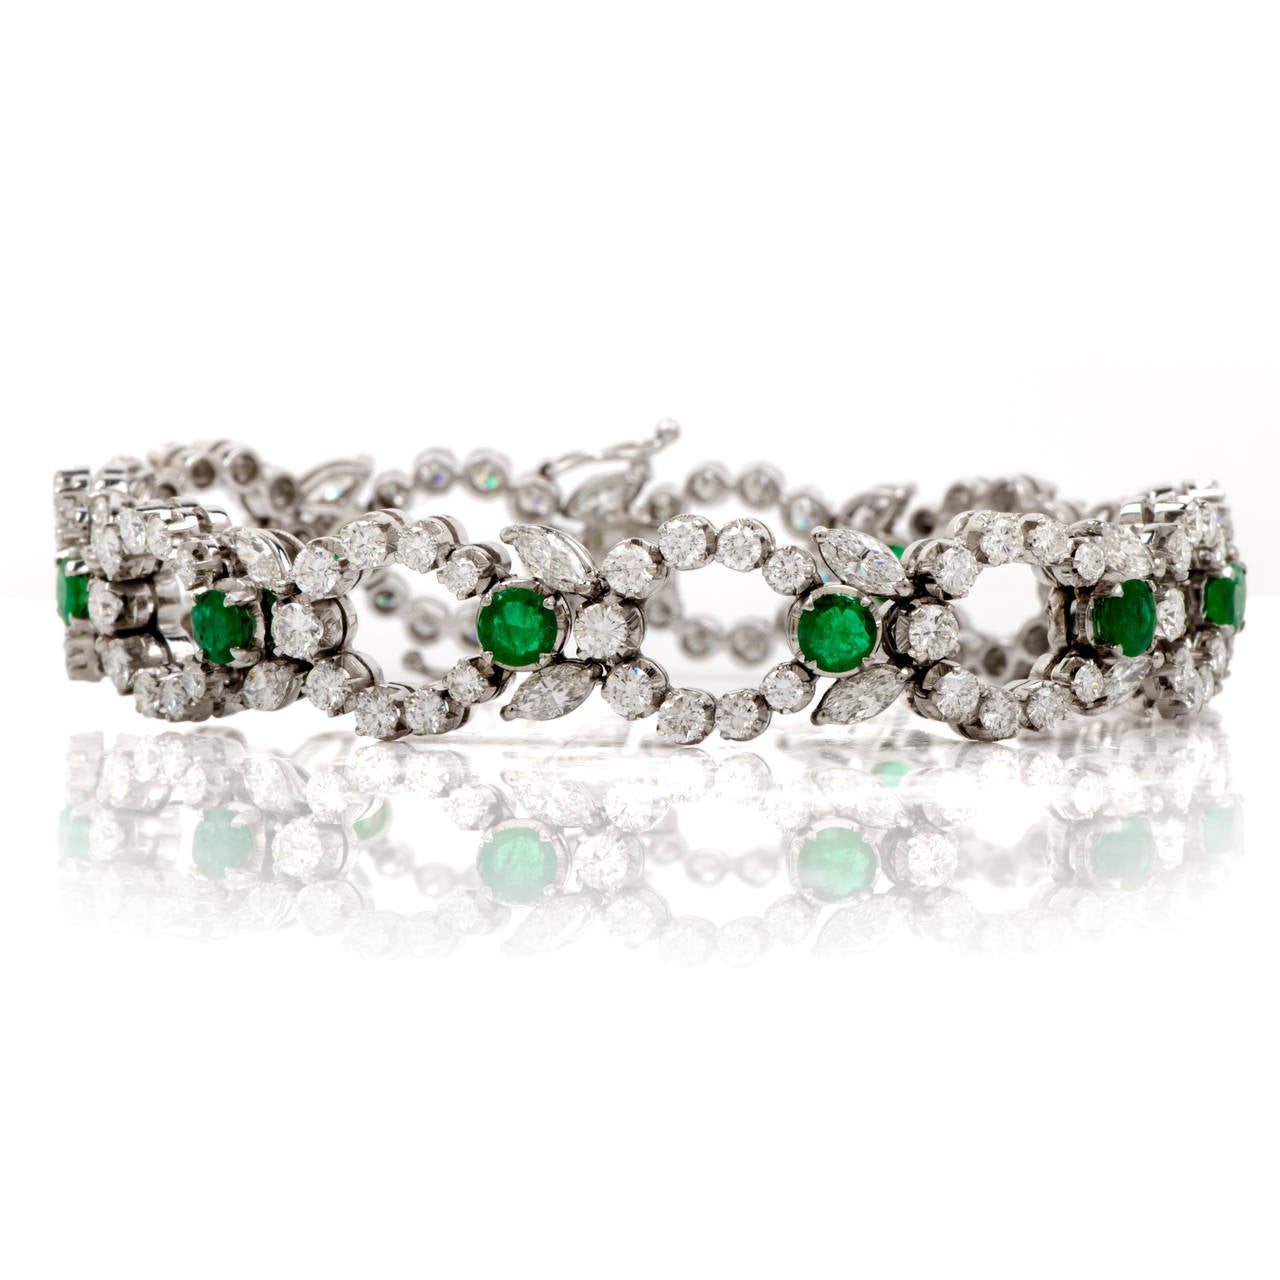 This  Art Deco  bracelet with emeralds and diamonds is crafted in solid platinum, weighing 24.4 grams and measuring 6 3/4